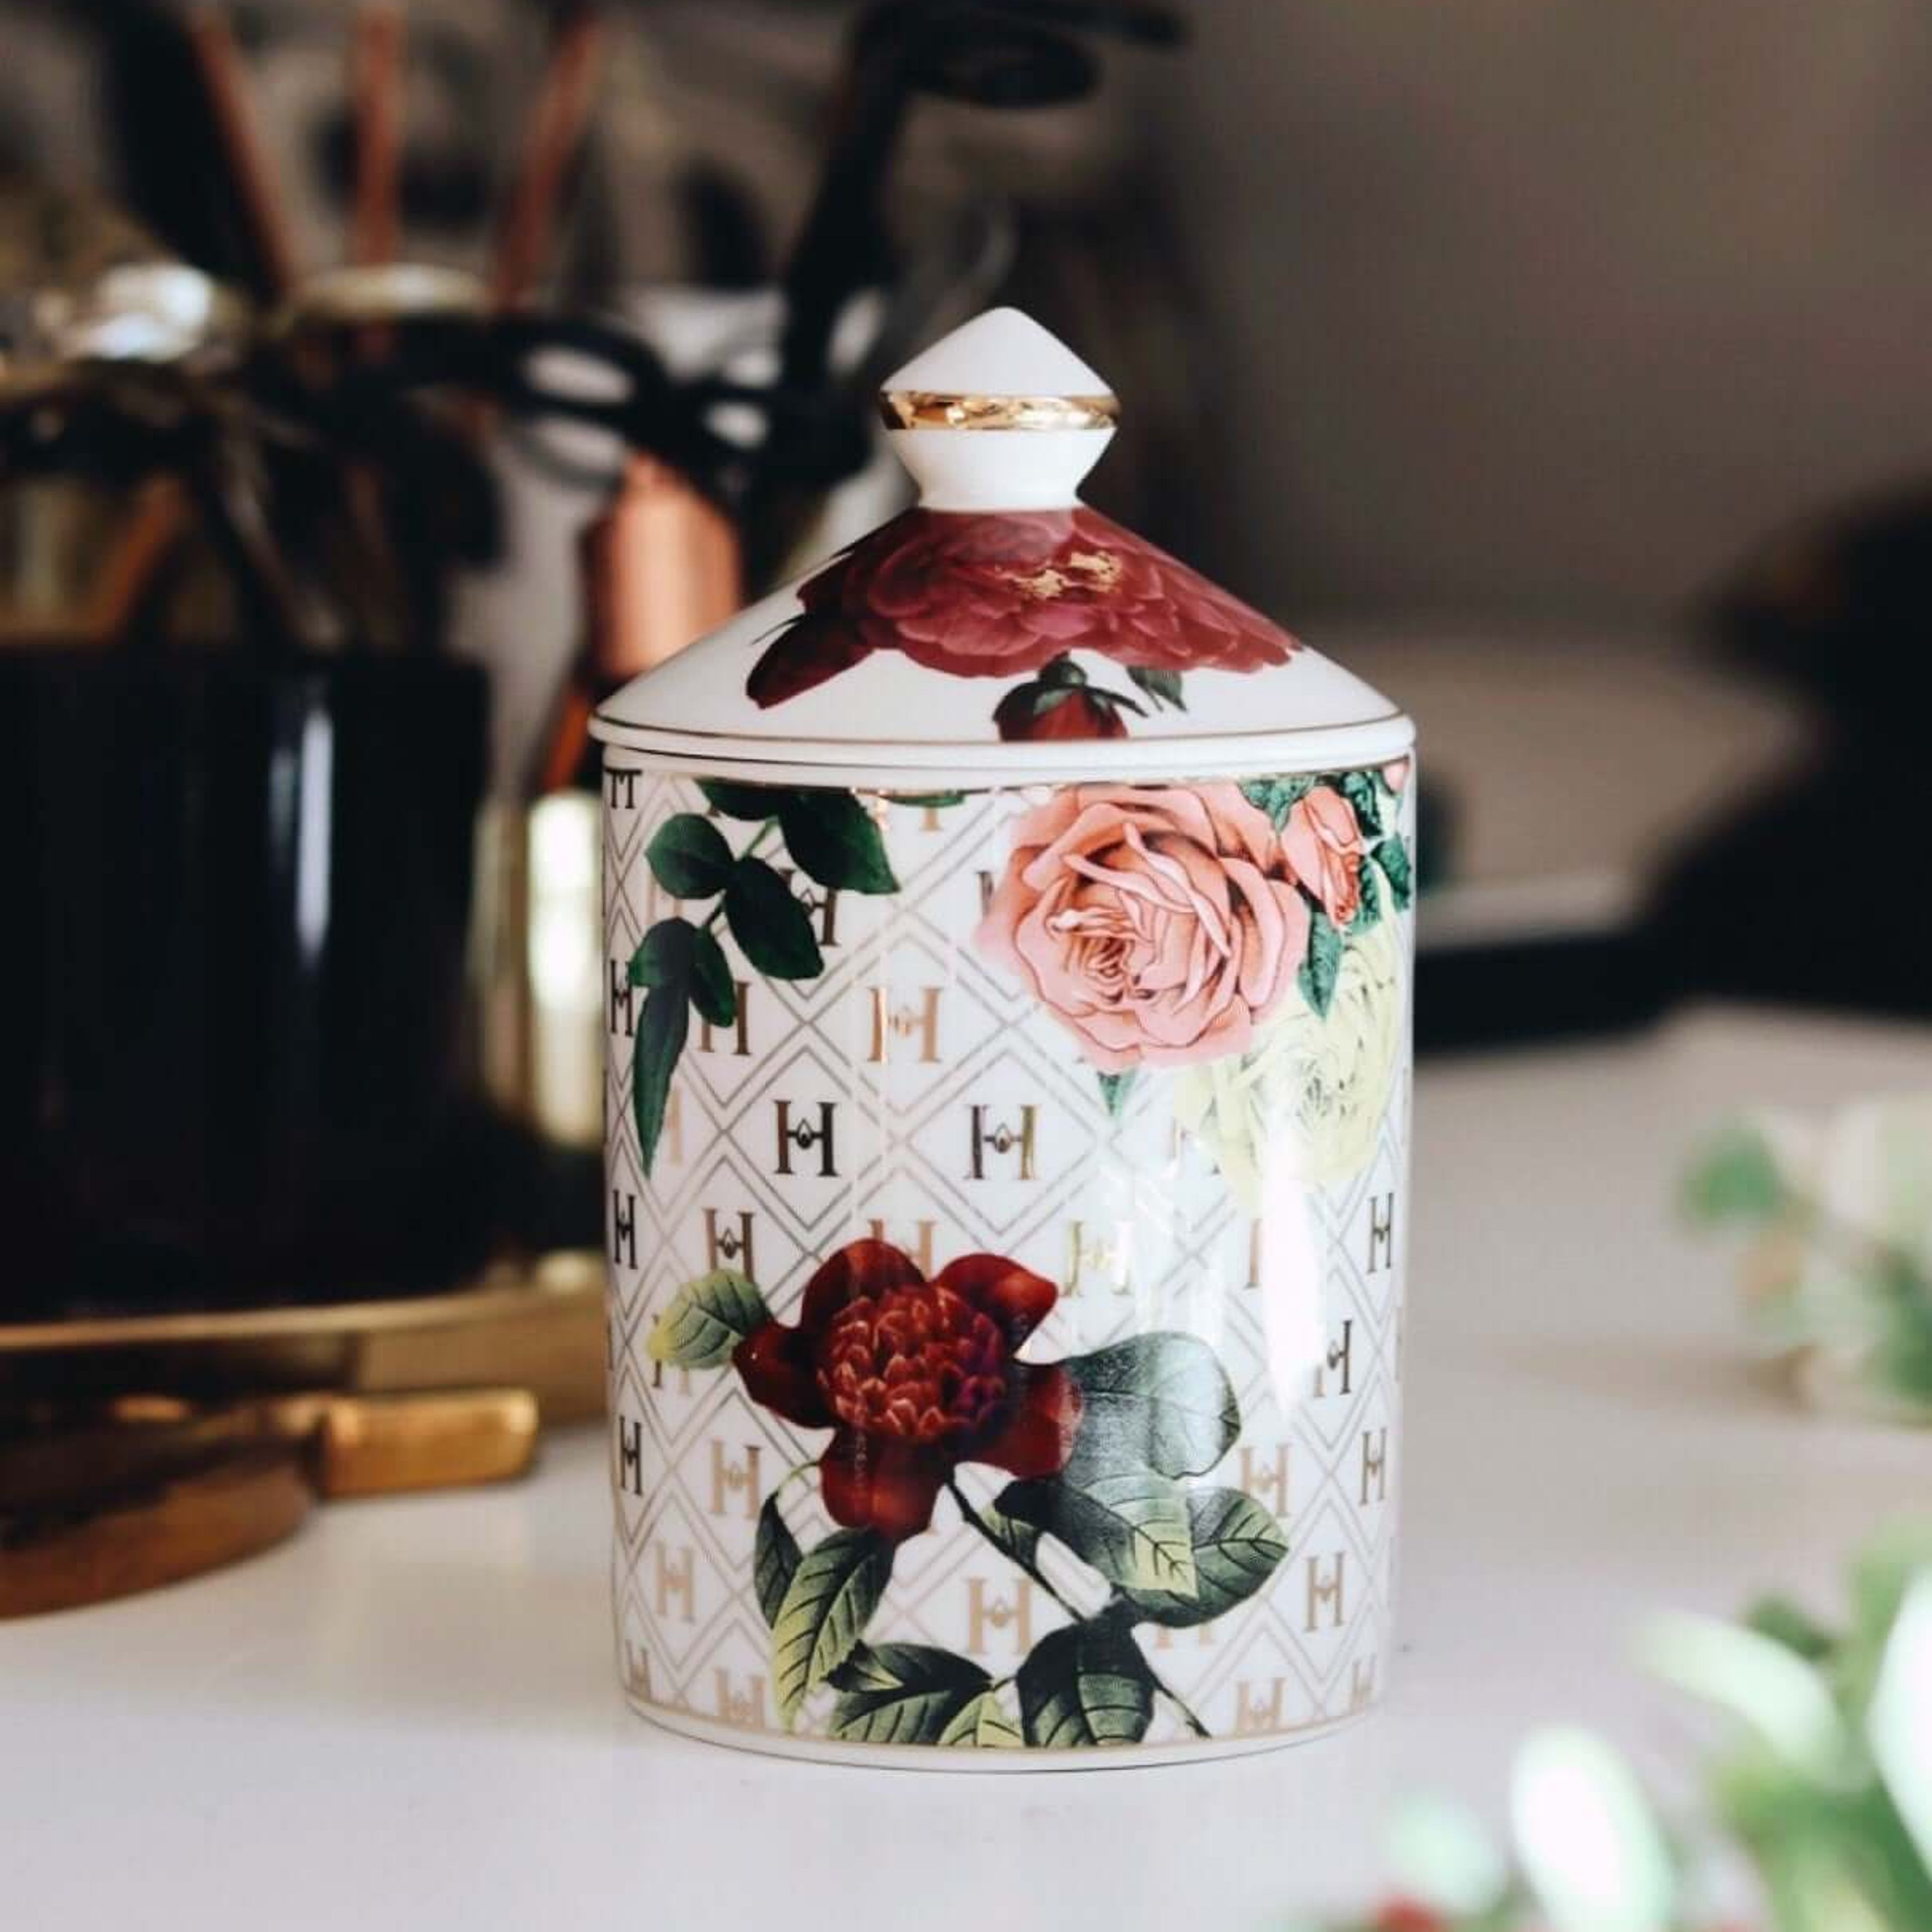 “Lady Day” White Floral Ceramic Luxury Candle